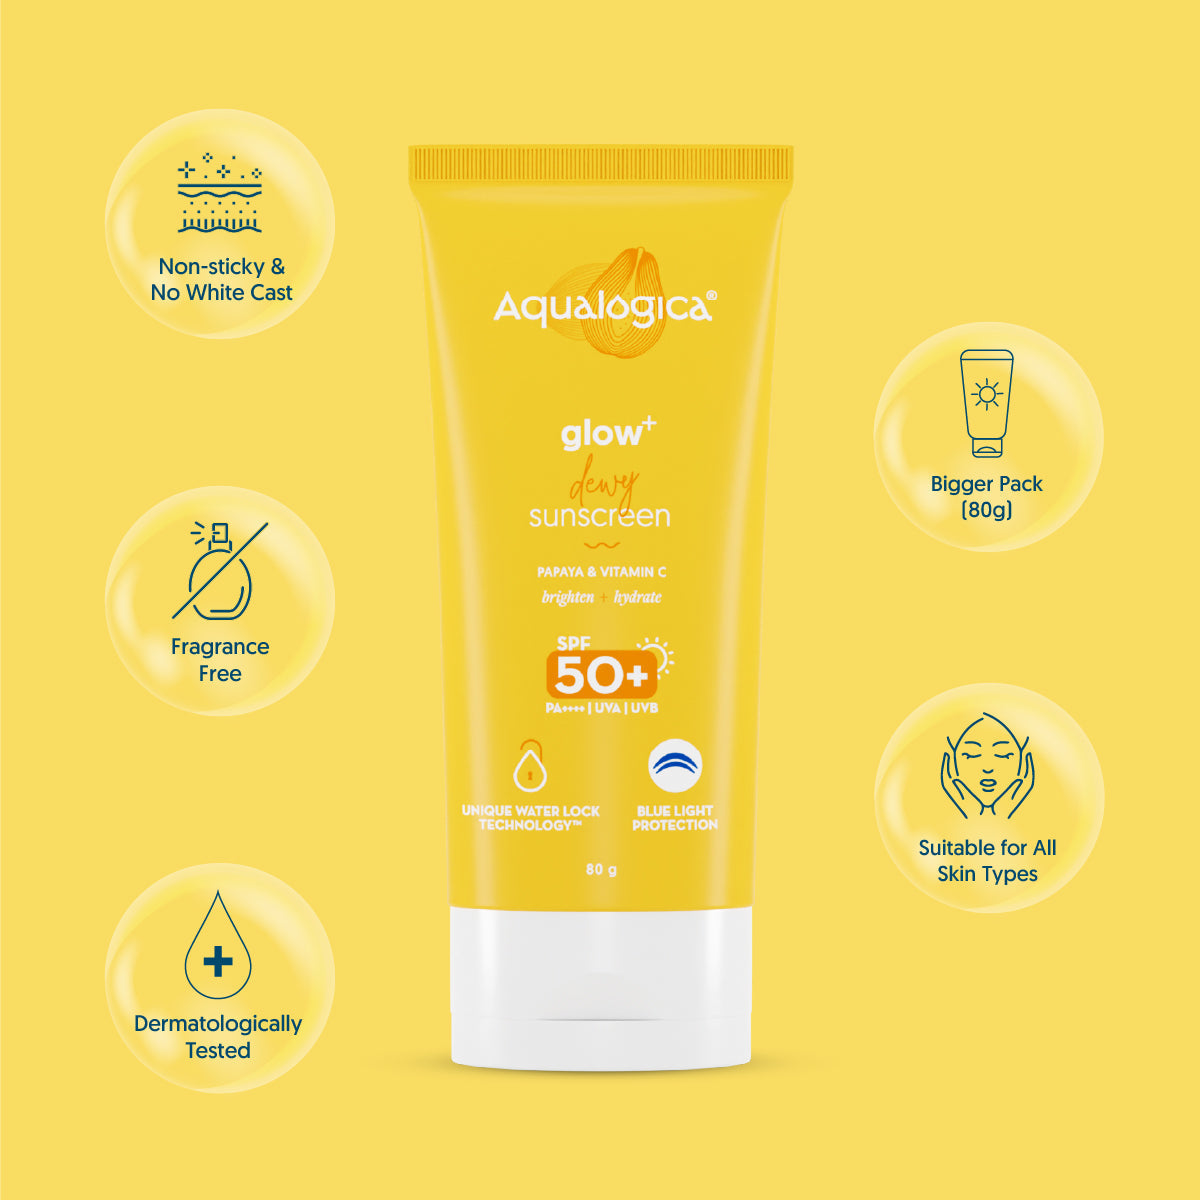 FREEBIE_Glow+ Dewy Sunscreen with SPF 50+ & PA++++ for UVA/B & Blue Light Protection & No White Cast - 80g